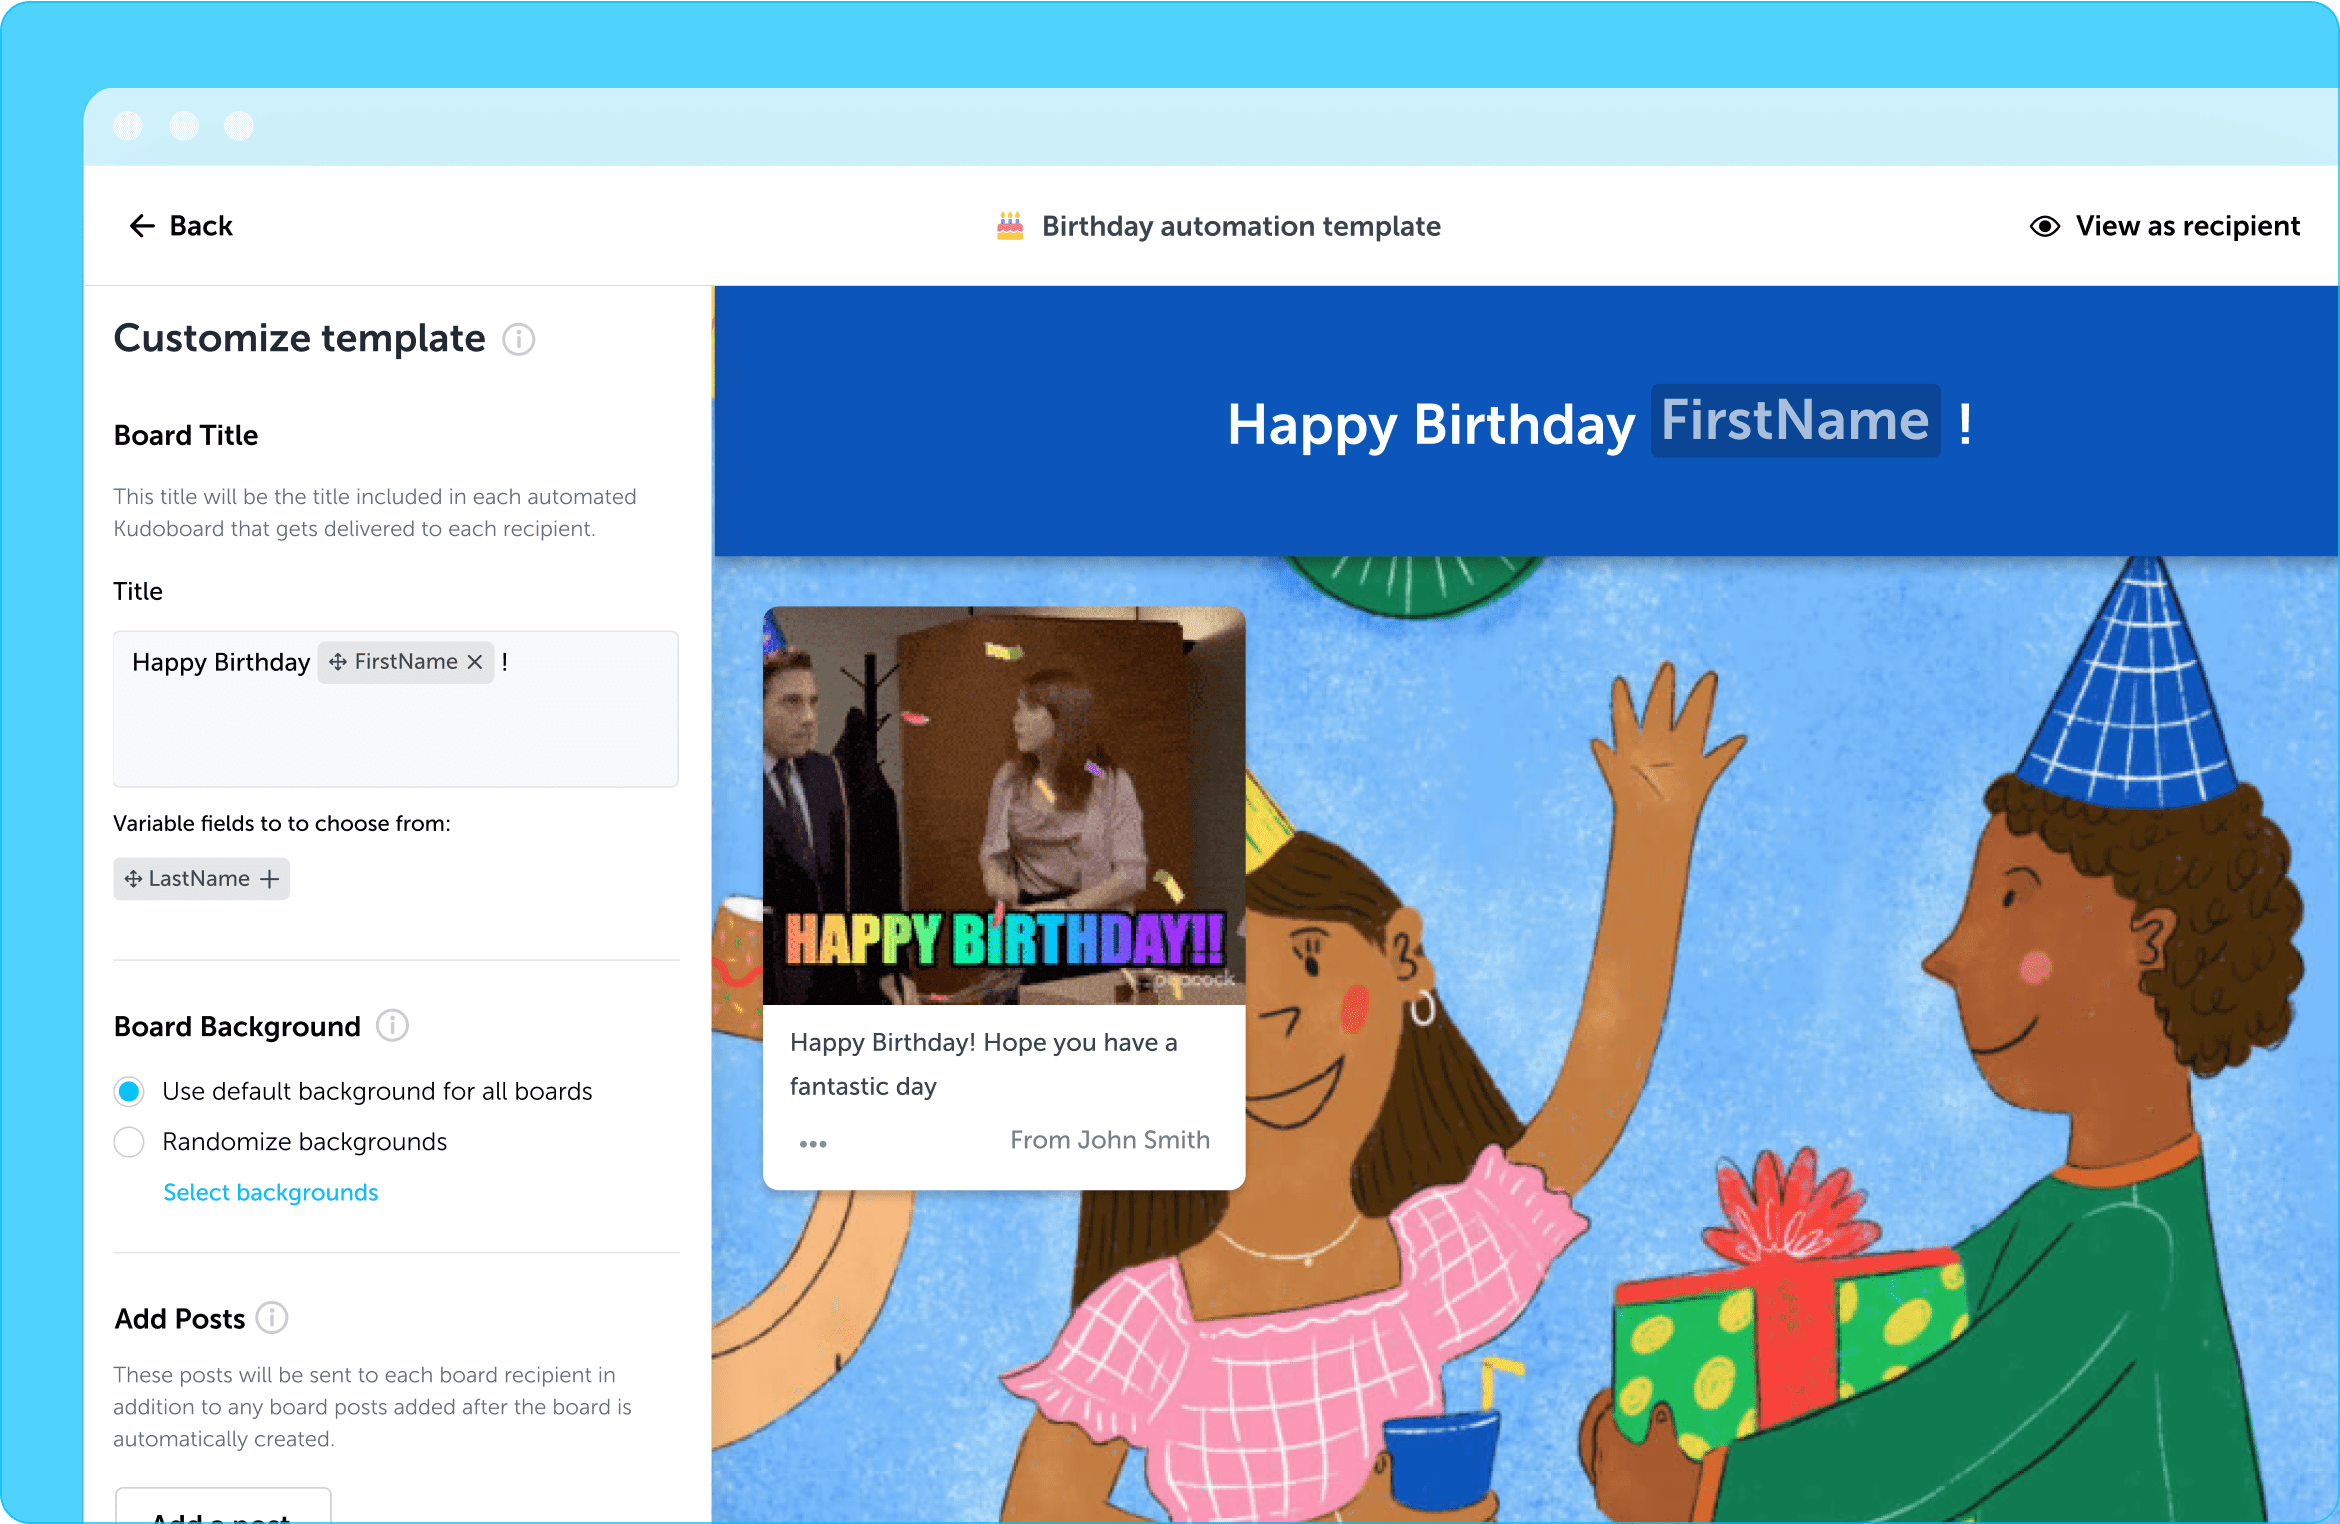 Web browser with birthday automation template and customization options